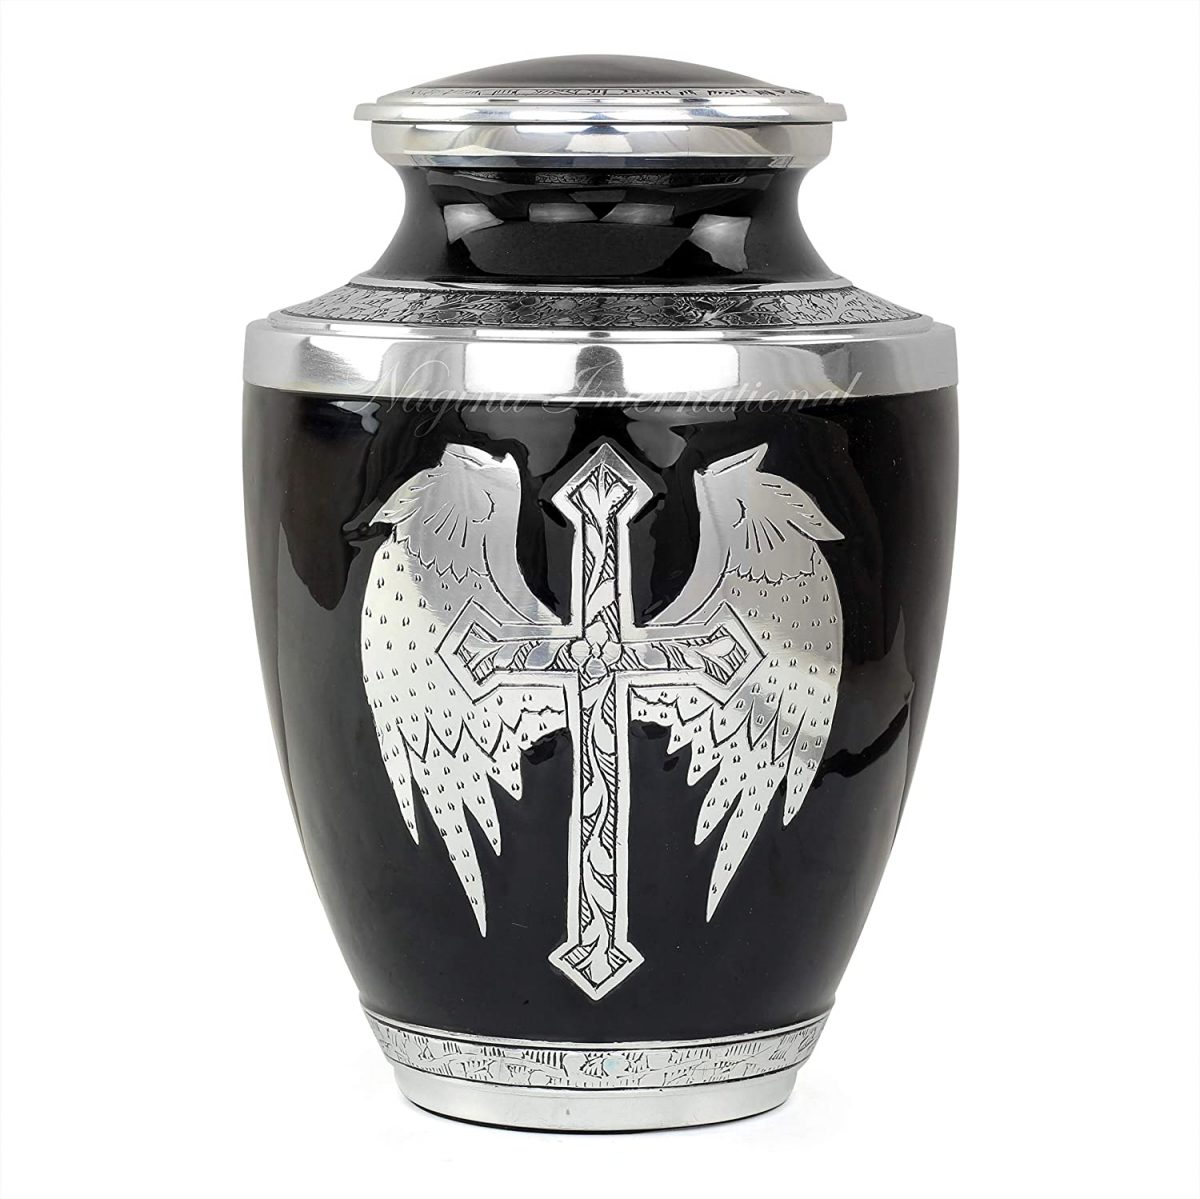 10" Aluminum Decorative Funeral Urns For Cremated Human Ash Remains Storage | Beautiful Funeral Pot For Pet Loss & Loved Ones | Large Size Engraved Metal Urns Premium Finish (Black Axe)